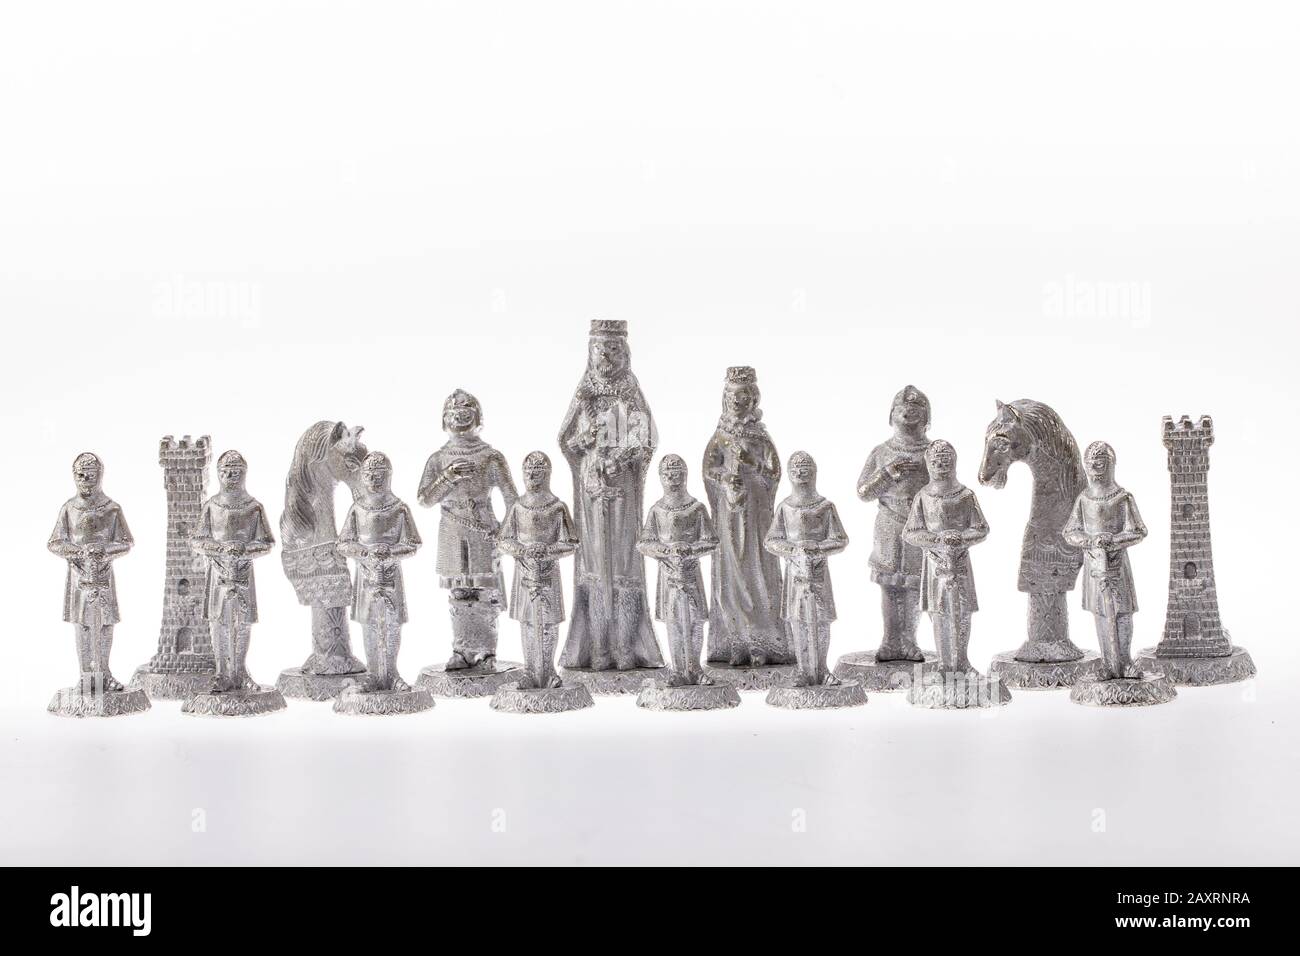 Сhess as an abstract concept. Beautiful antique chess set on white background. Stock Photo